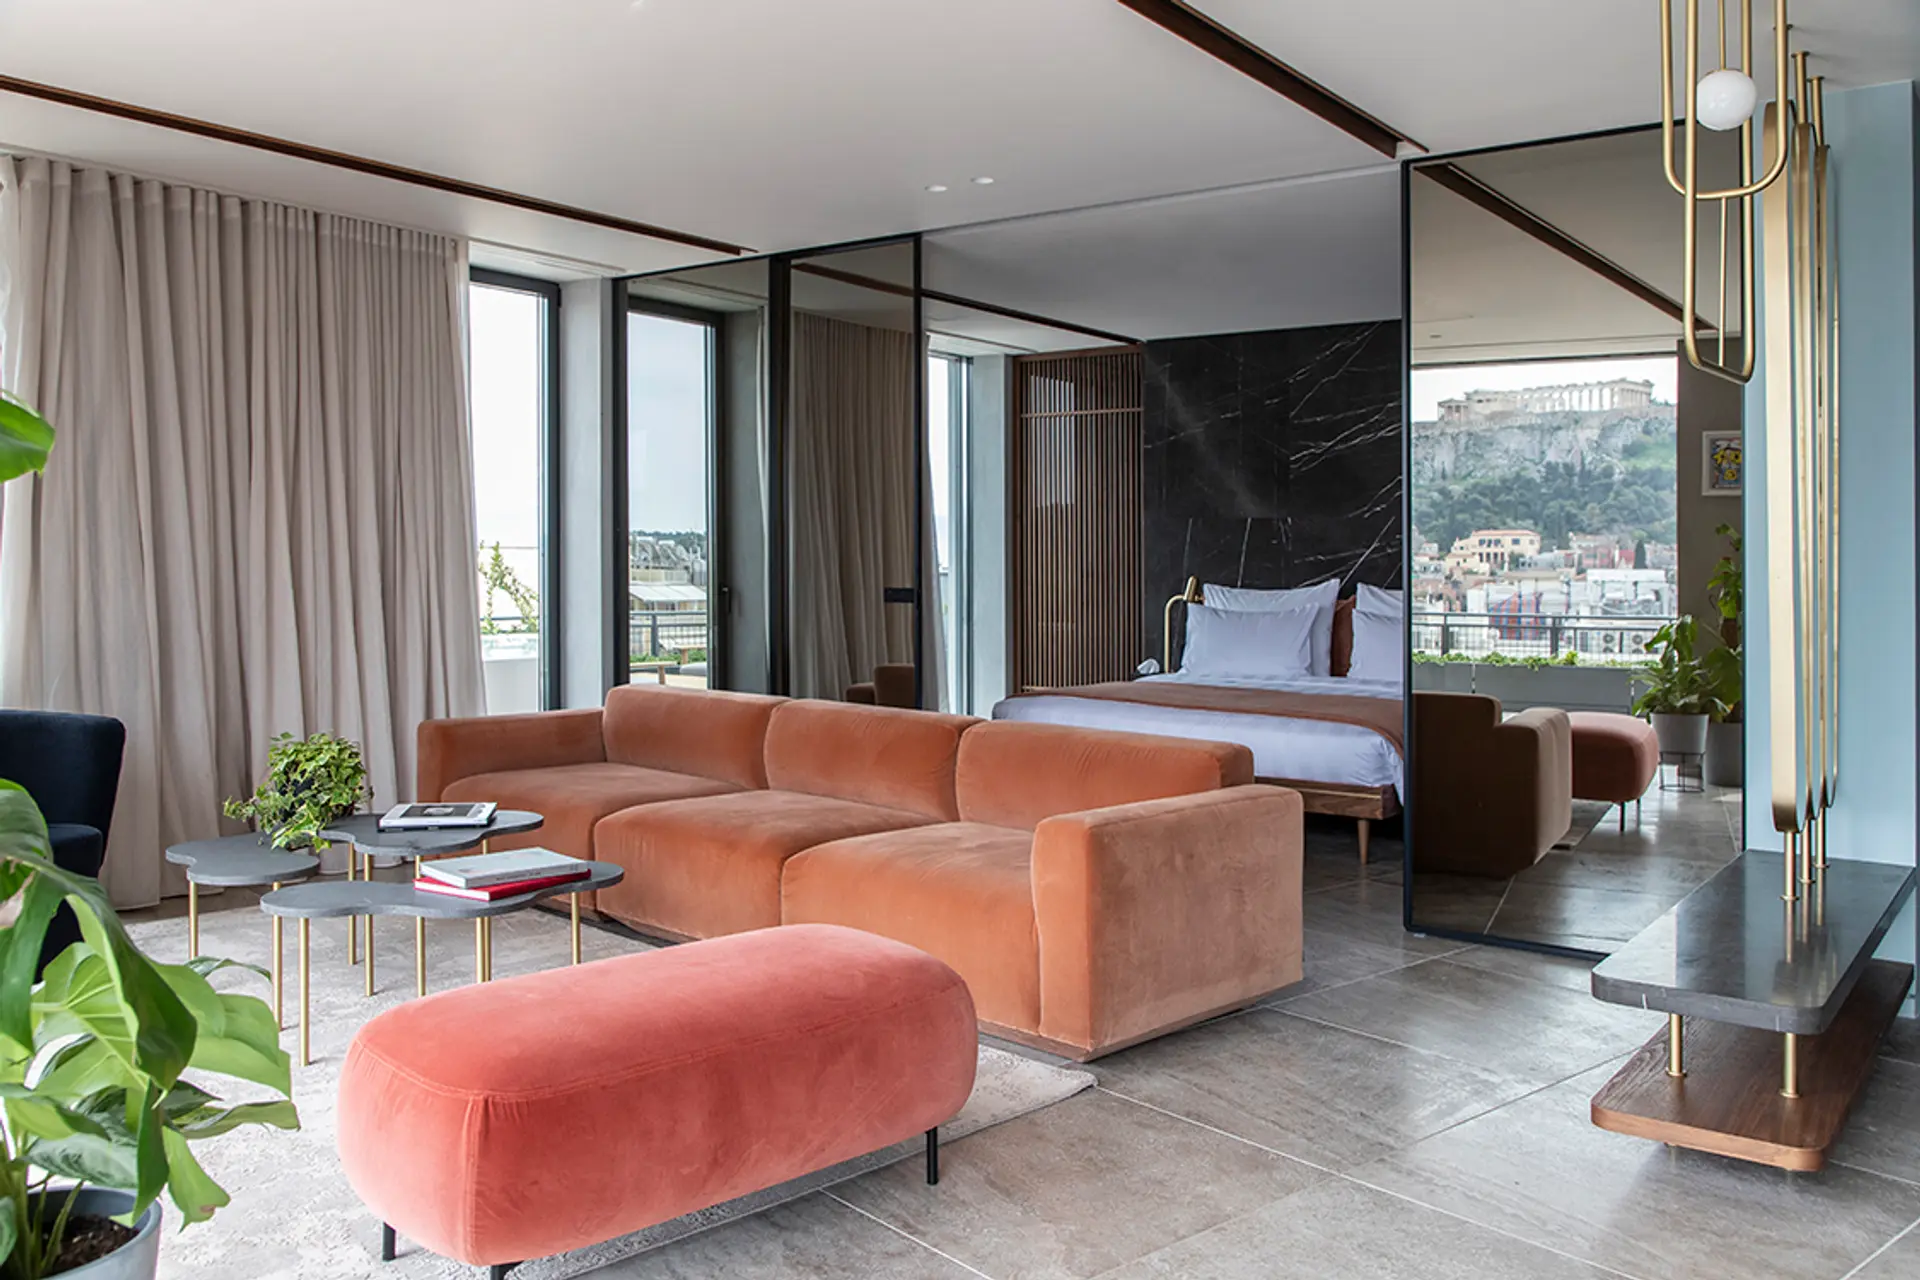 Hotel room of Perianth Hotel with red and orange furniture, kingsize bed in white, dark grey floor, and view of Athens